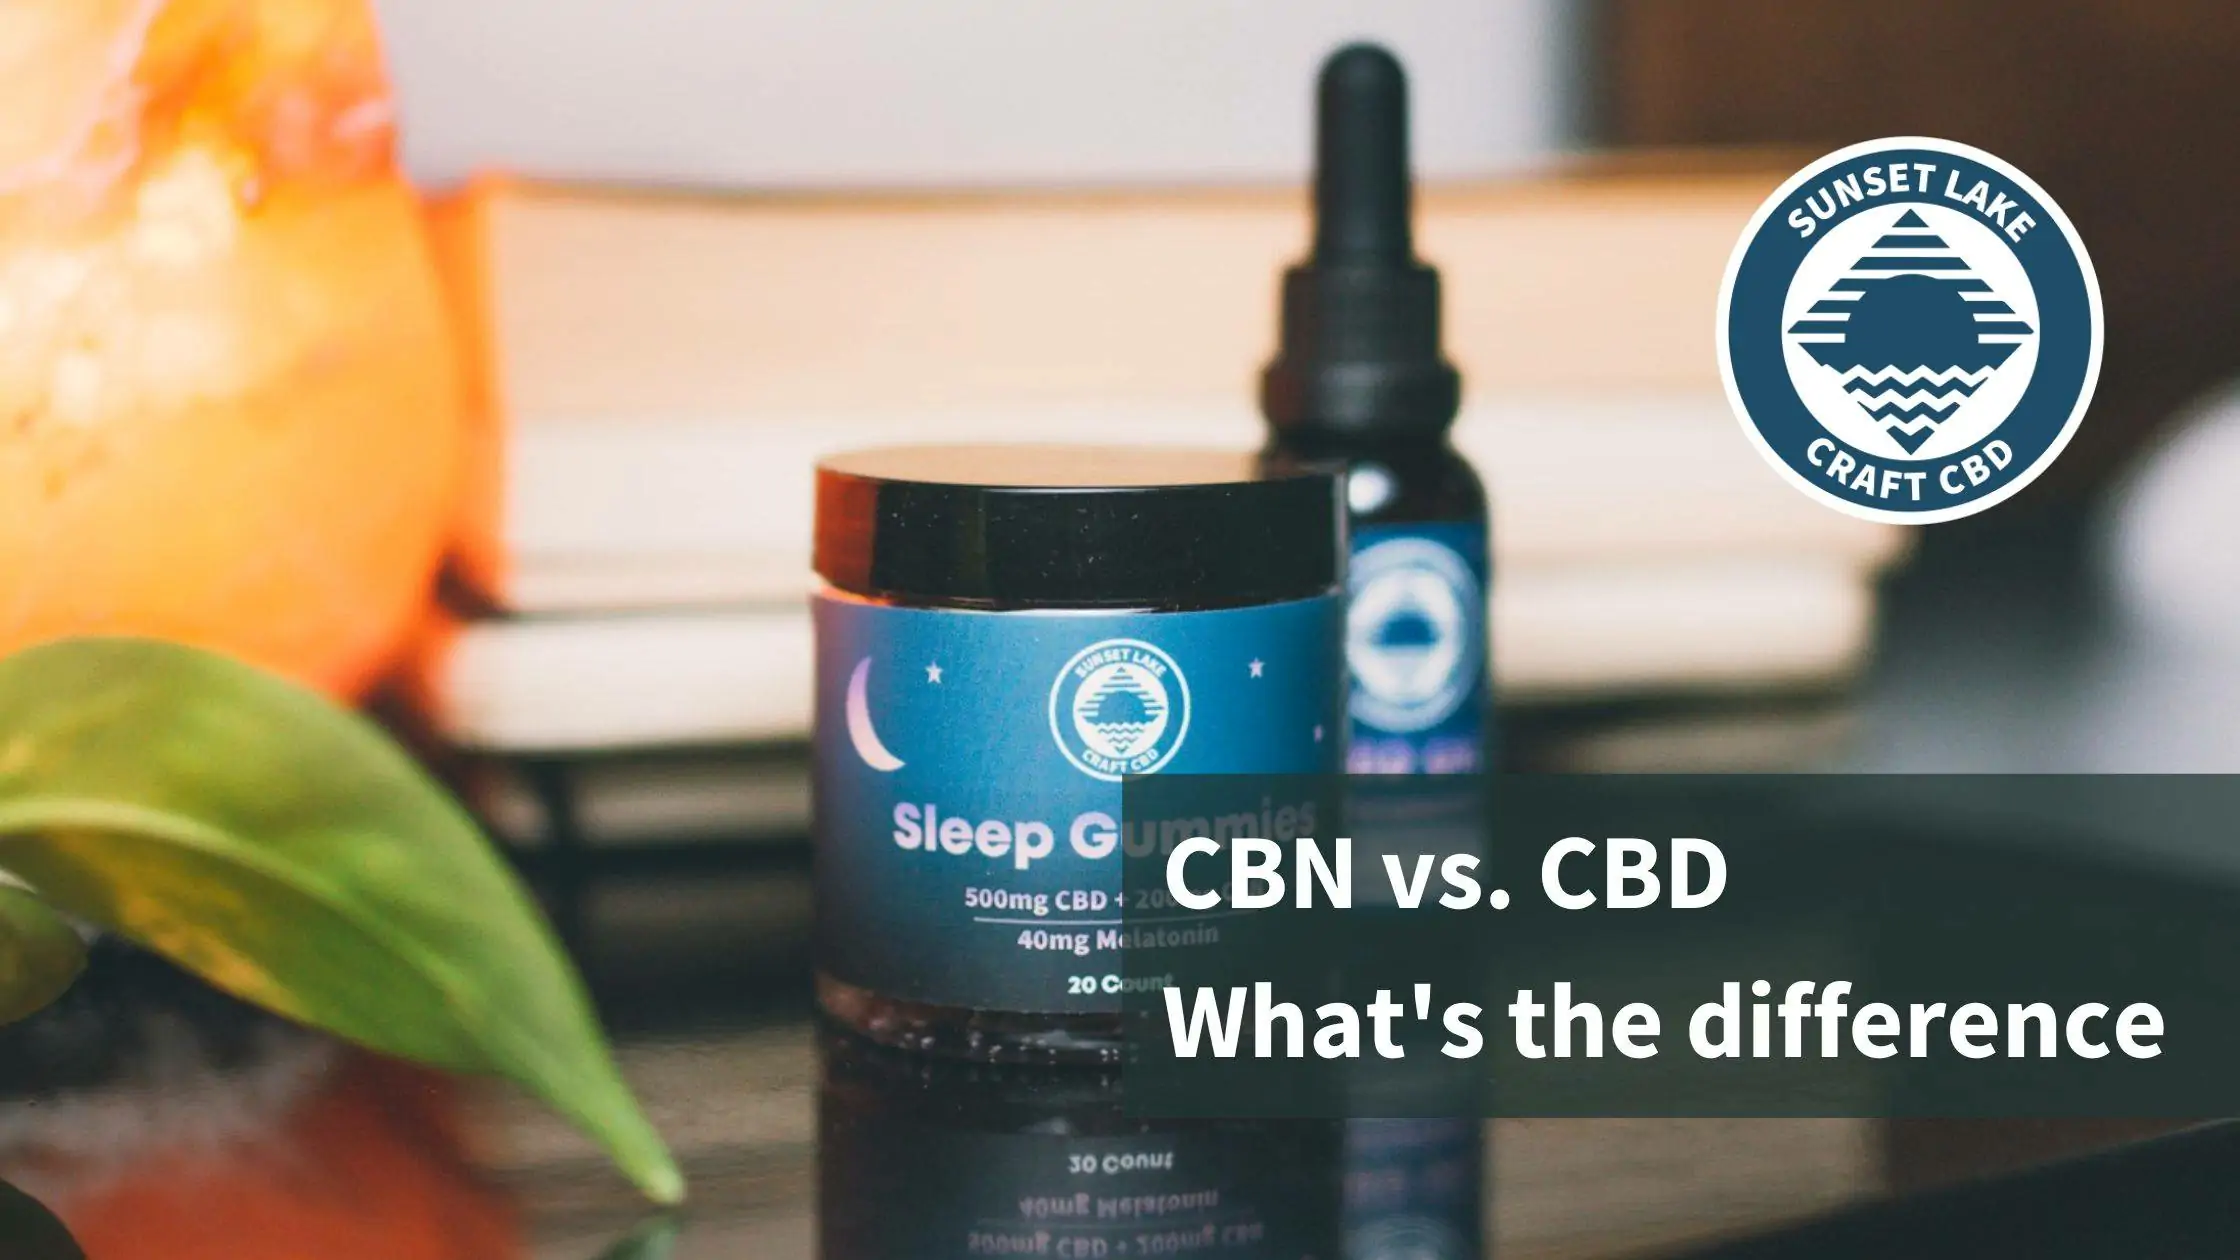 CBN vs. CBD: What Are The Differences?